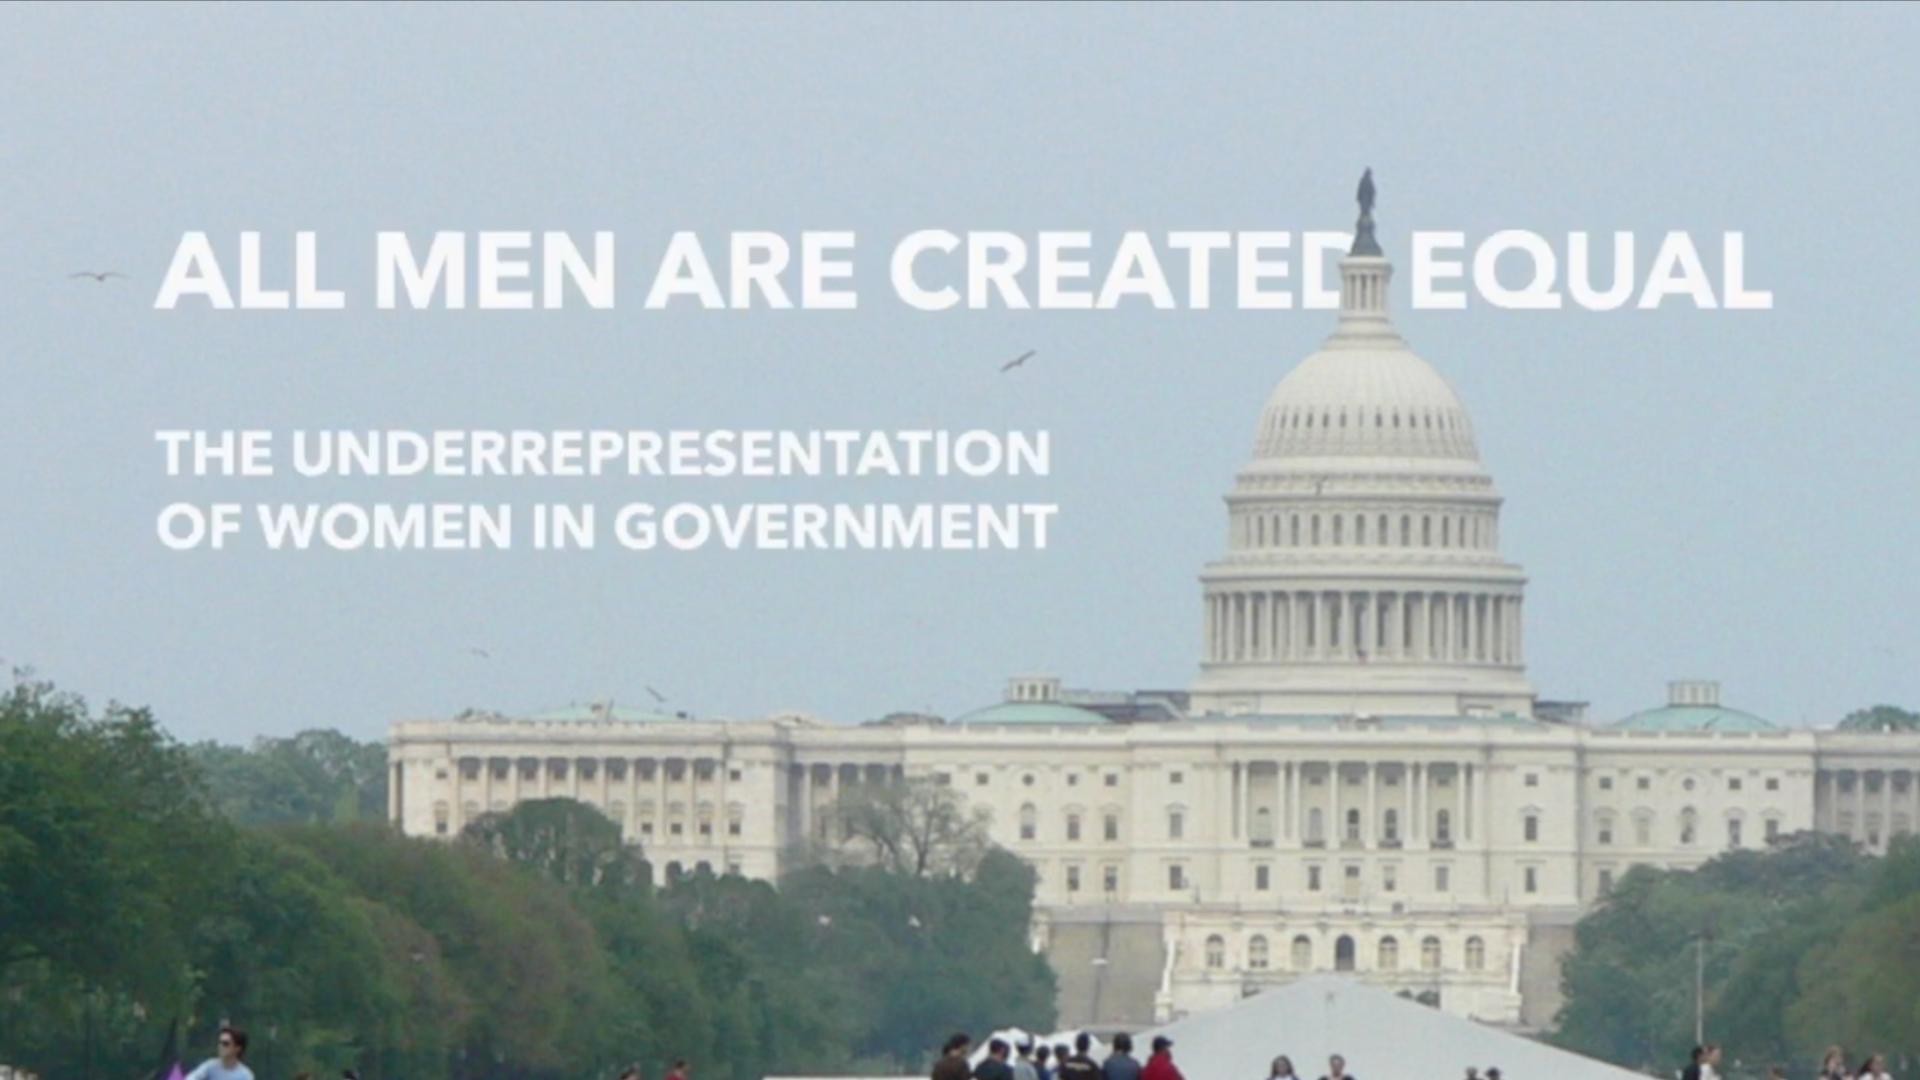 All Men Are Created Equal: The Underrepresentation of Women in Government